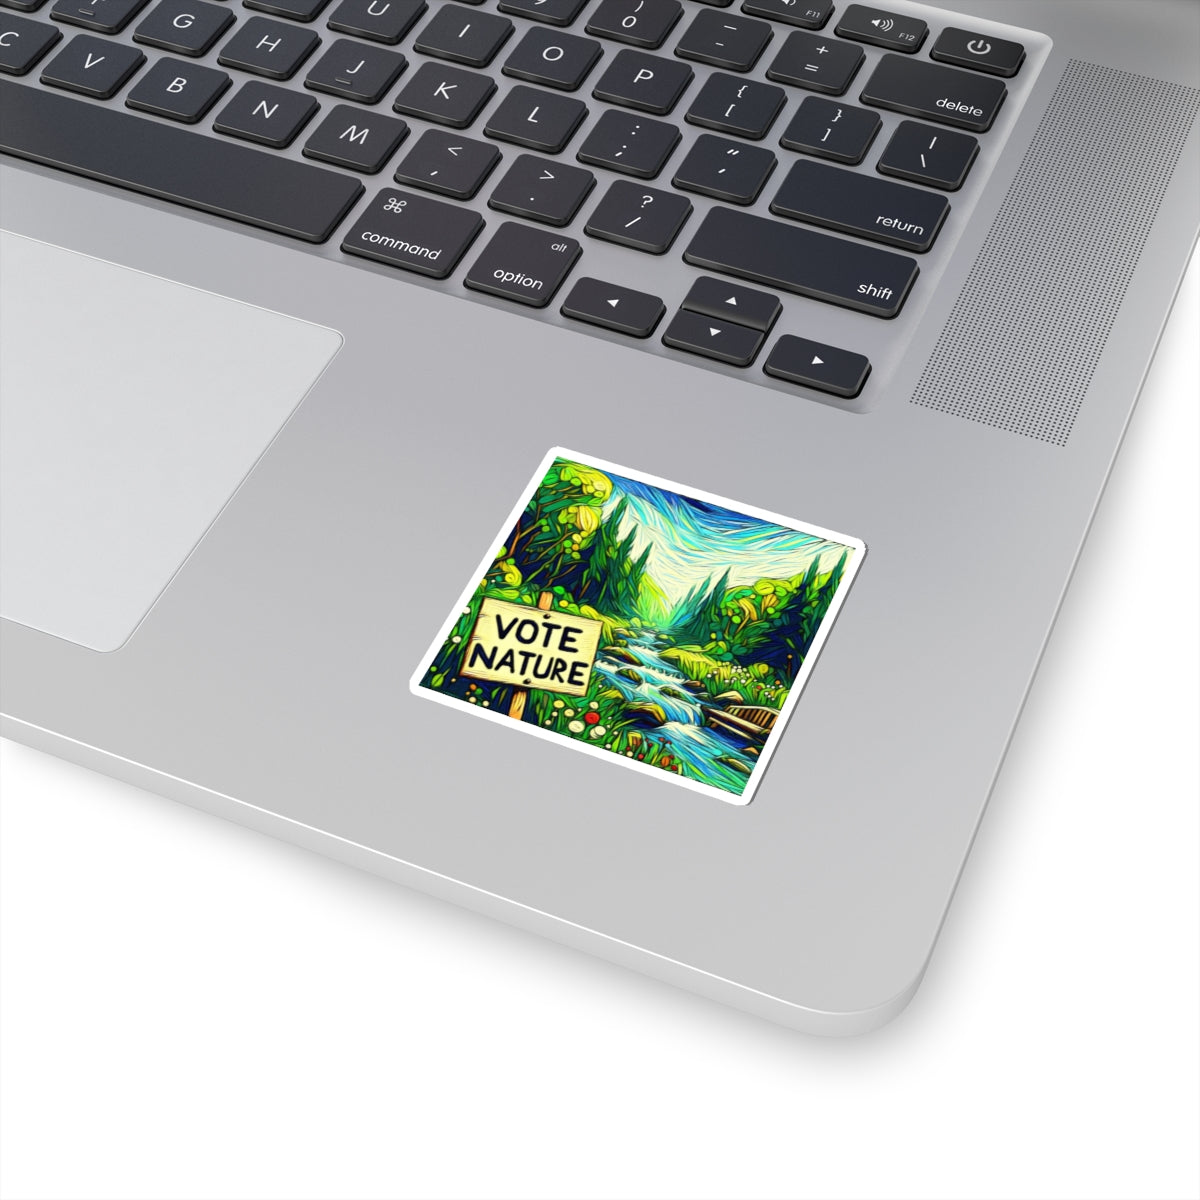 Inspirational Caring Statement vinyl Sticker: Vote Nature! for laptop, kindle, phone, ipad, instrument case, notebook, mood board, or wall